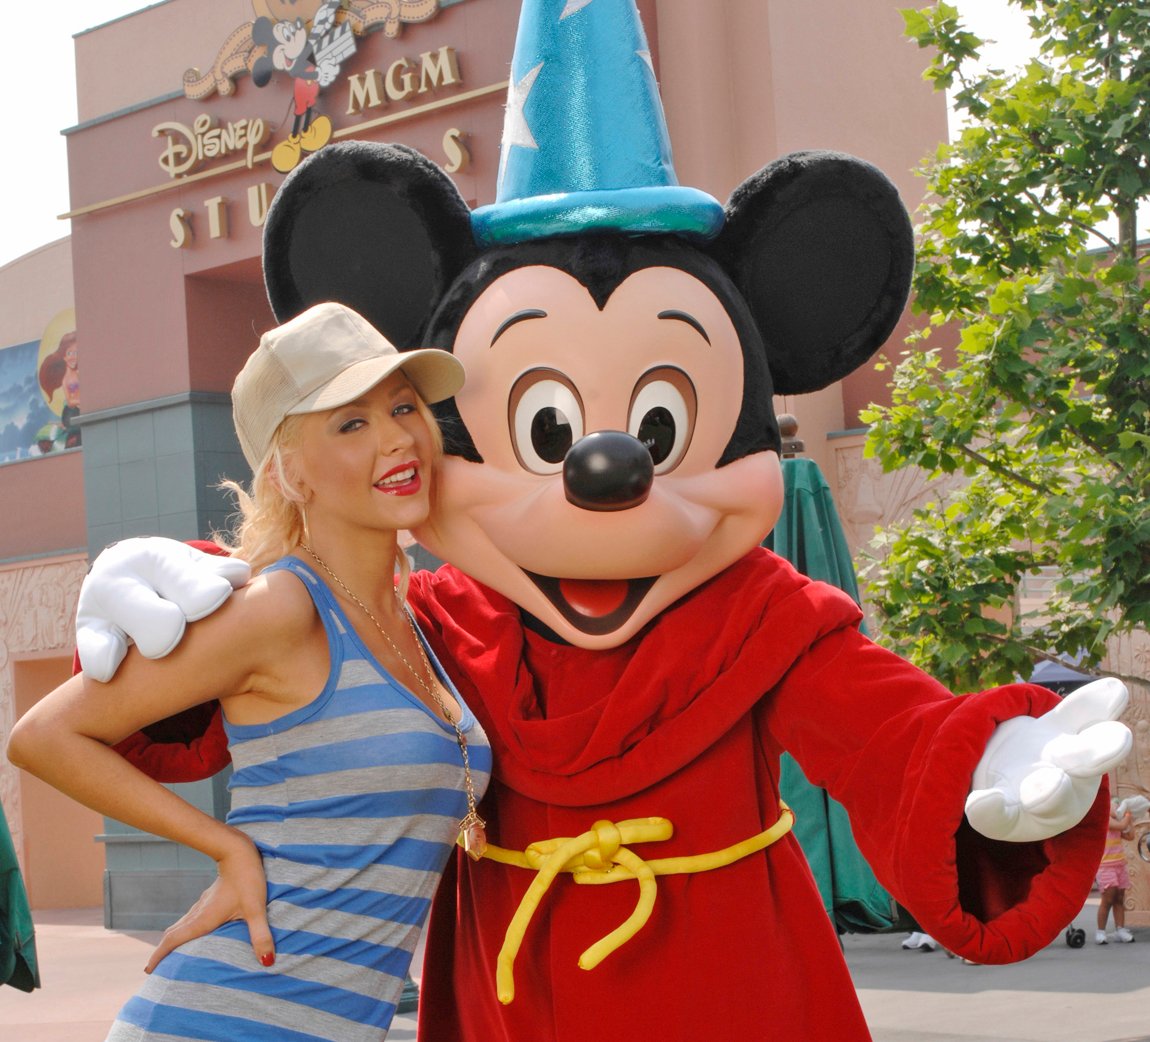 Christina Aguilera poses with Mickey Mouse at the Disney MGM Studios